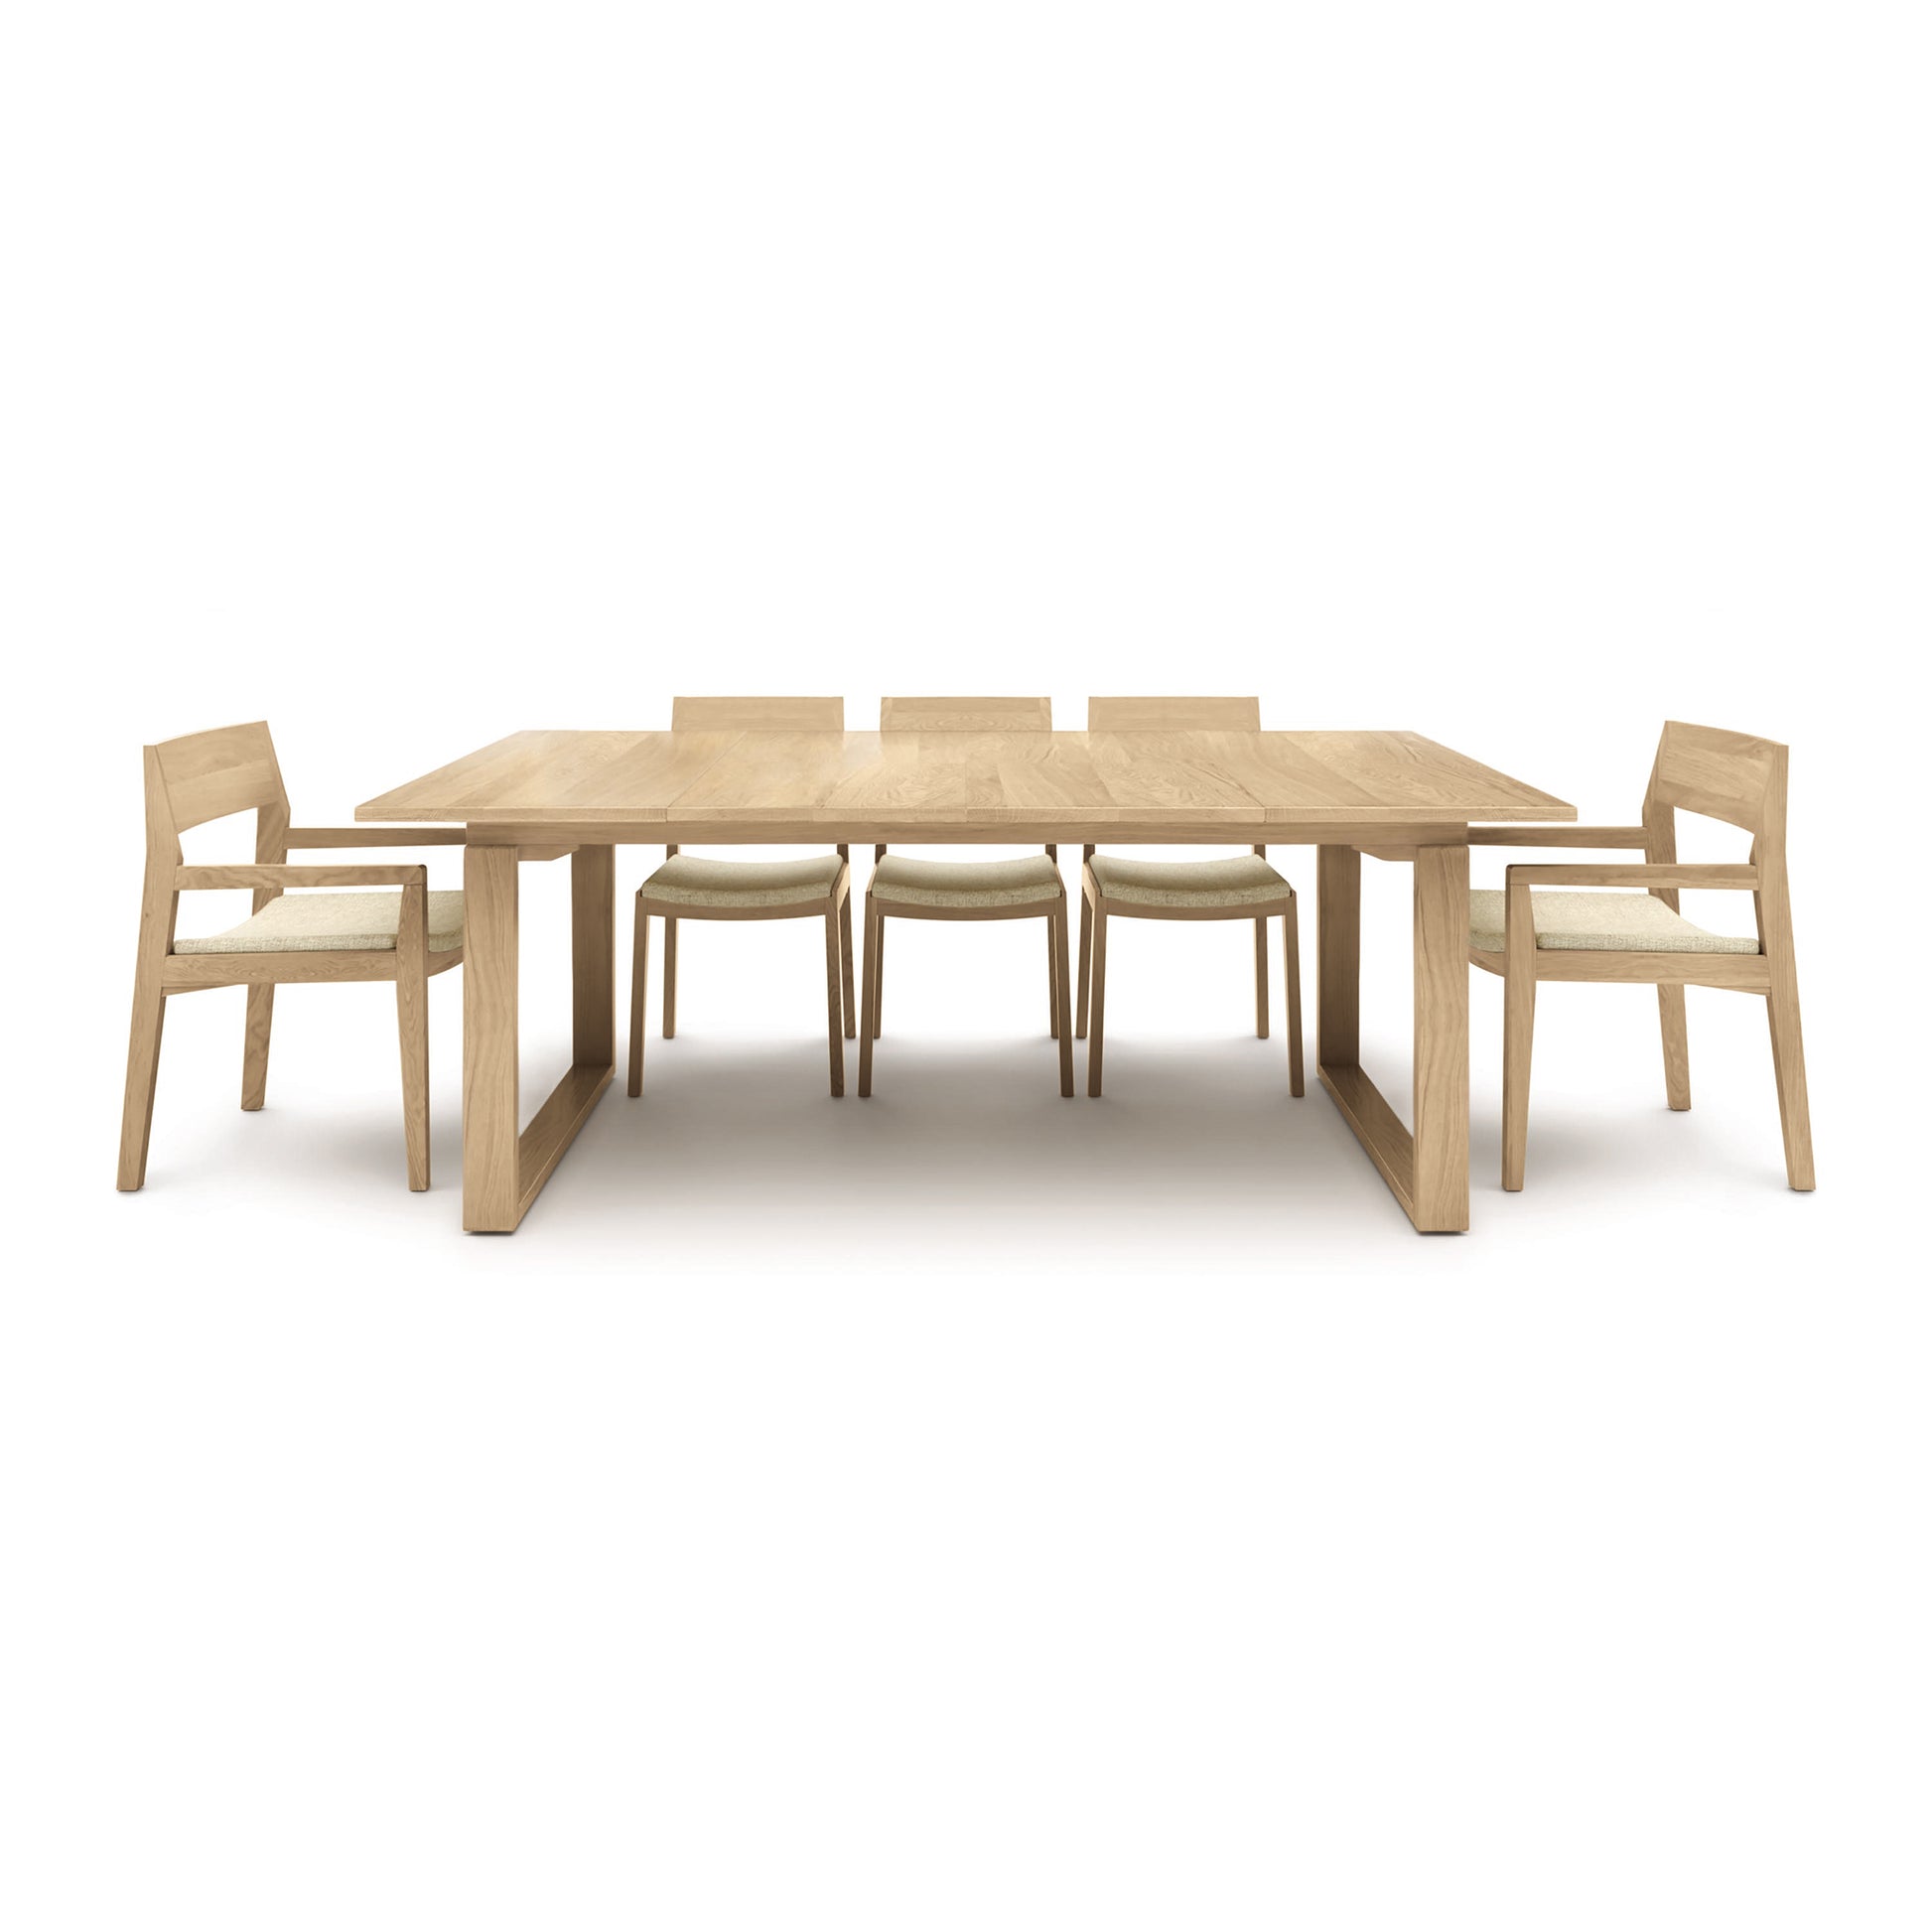 A white background showcases the Copeland Furniture Iso Oak Extension Dining Table, accompanied by six chairs. Made with solid oak wood, this dining set exudes elegance and durability.